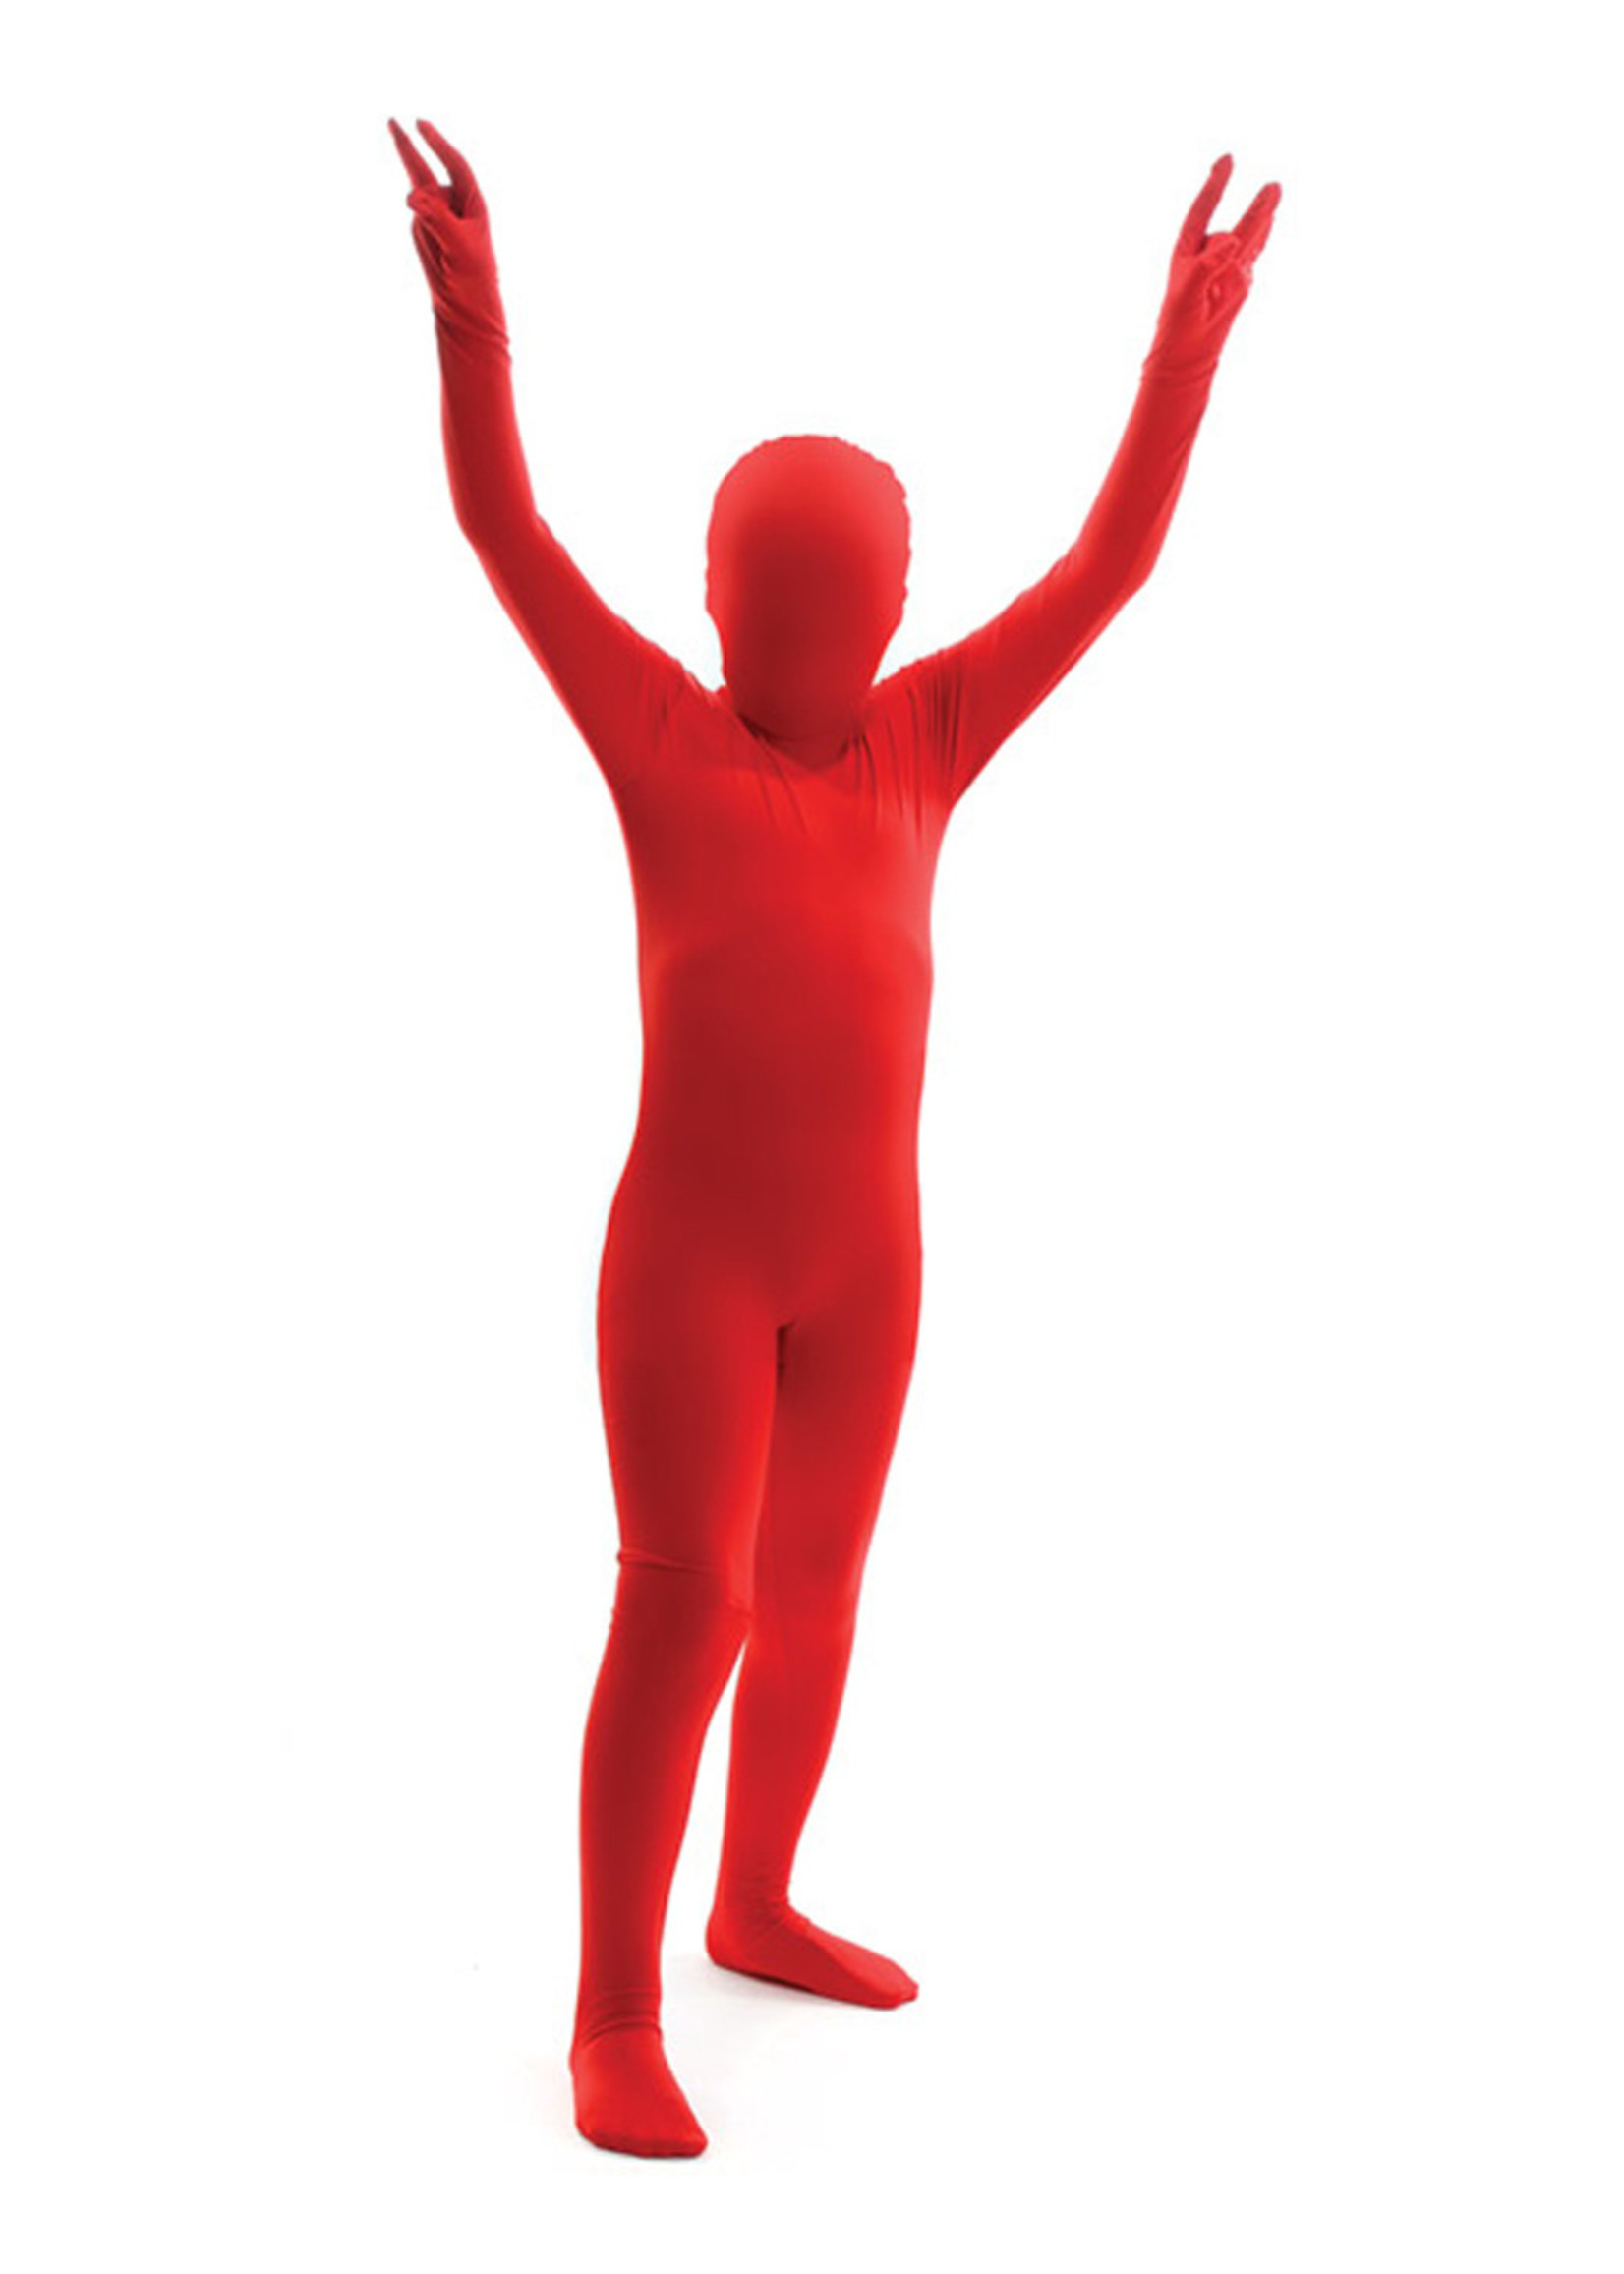 Red Morphsuit Costume - Boy's